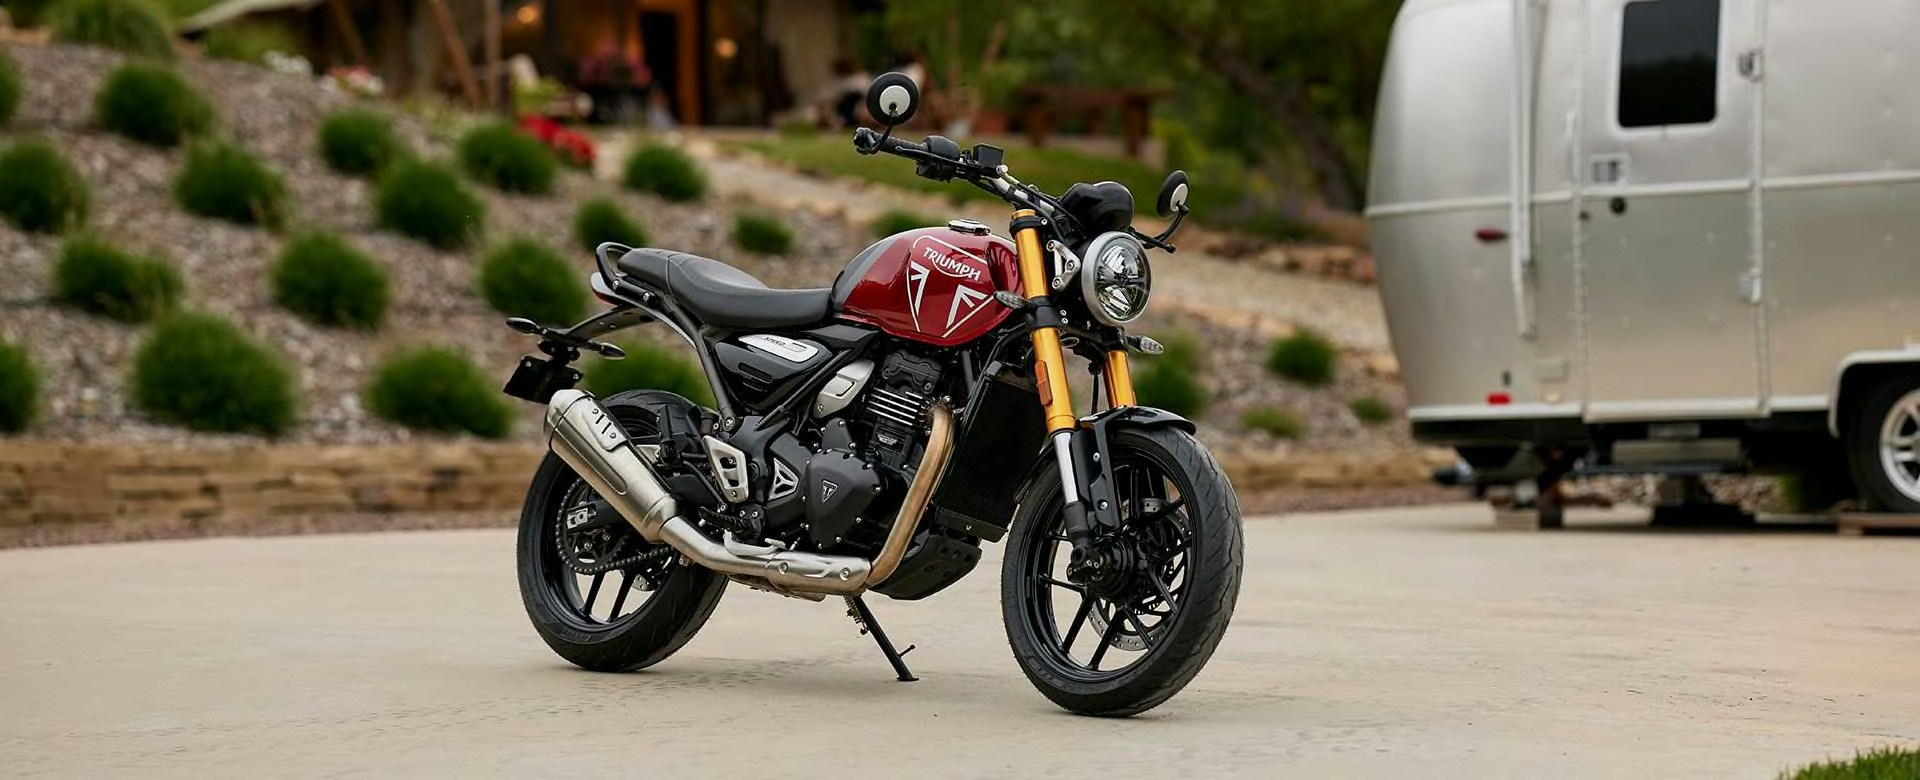 Triumph-Speed-400-Review